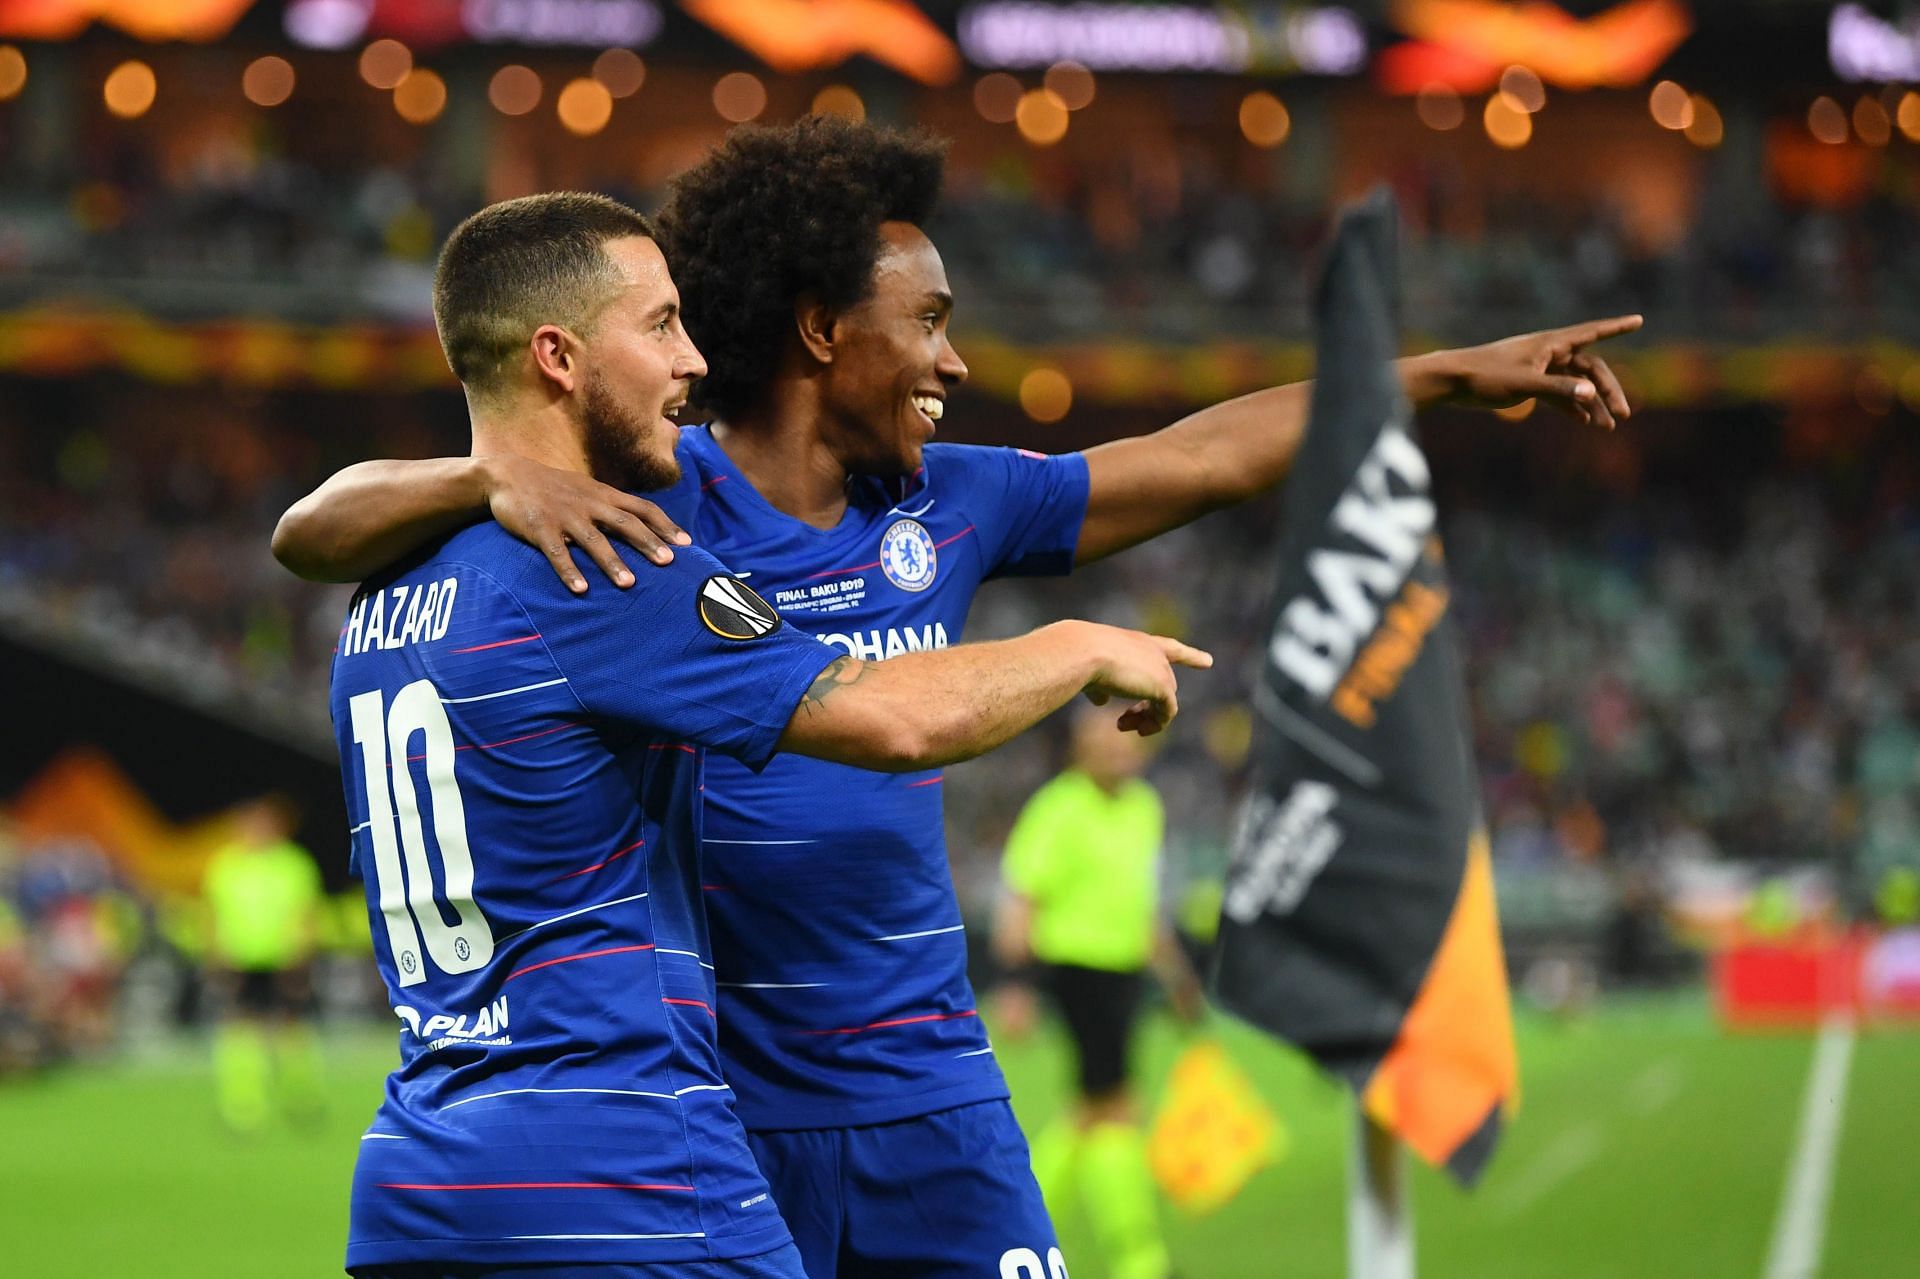 Chelsea have won the UEFA Champions League twice in the last ten years.